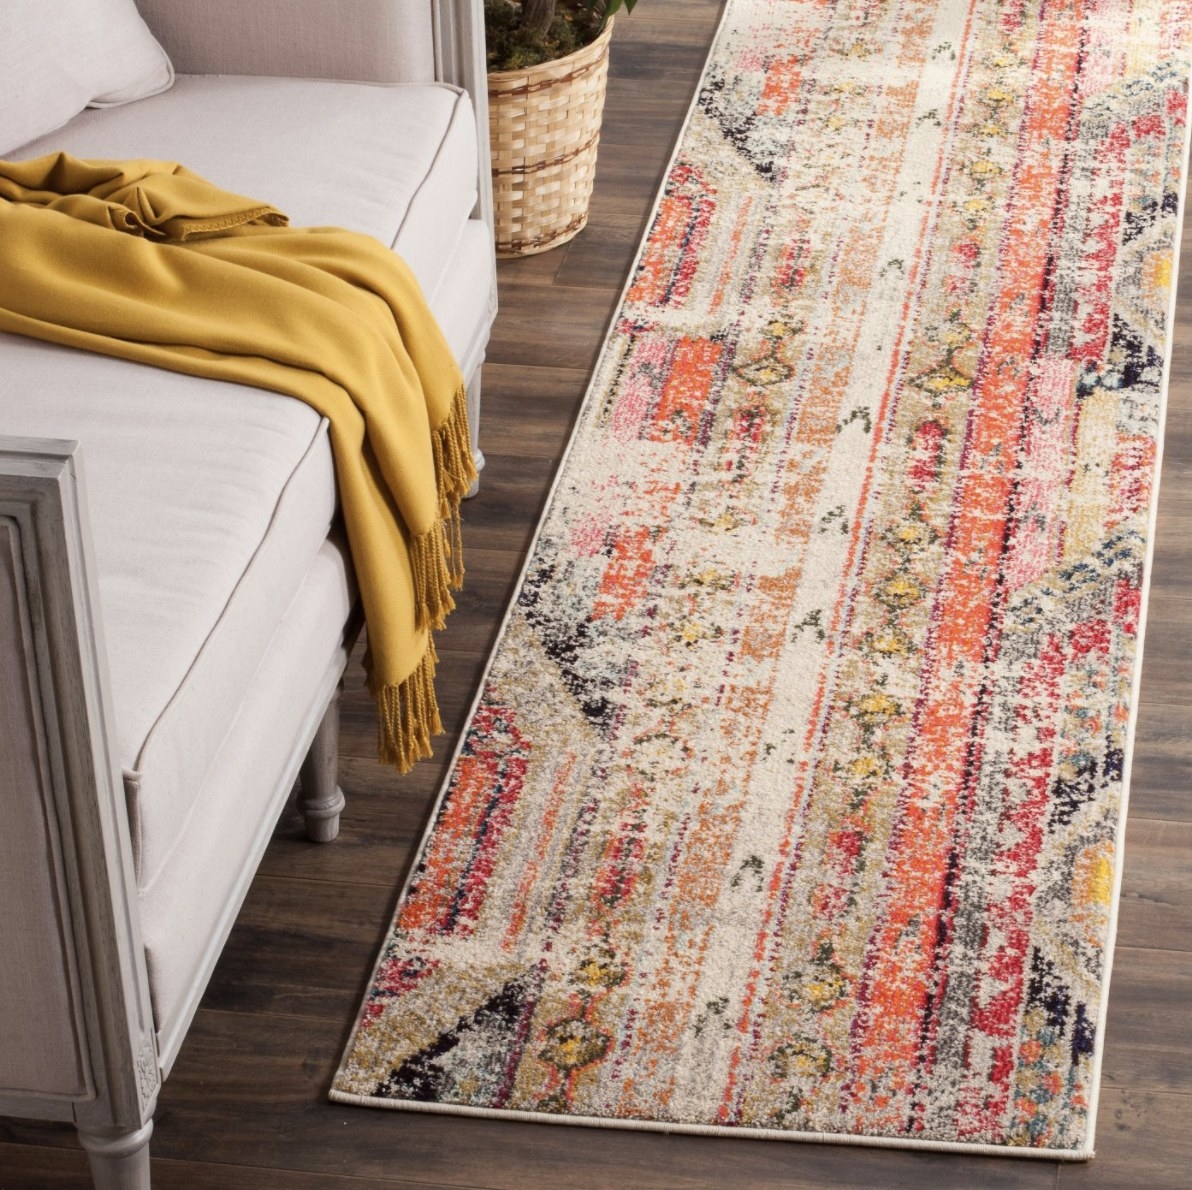 The long rectangular rug mixes yellows, blacks, oranges, reds and various other vibrant colors